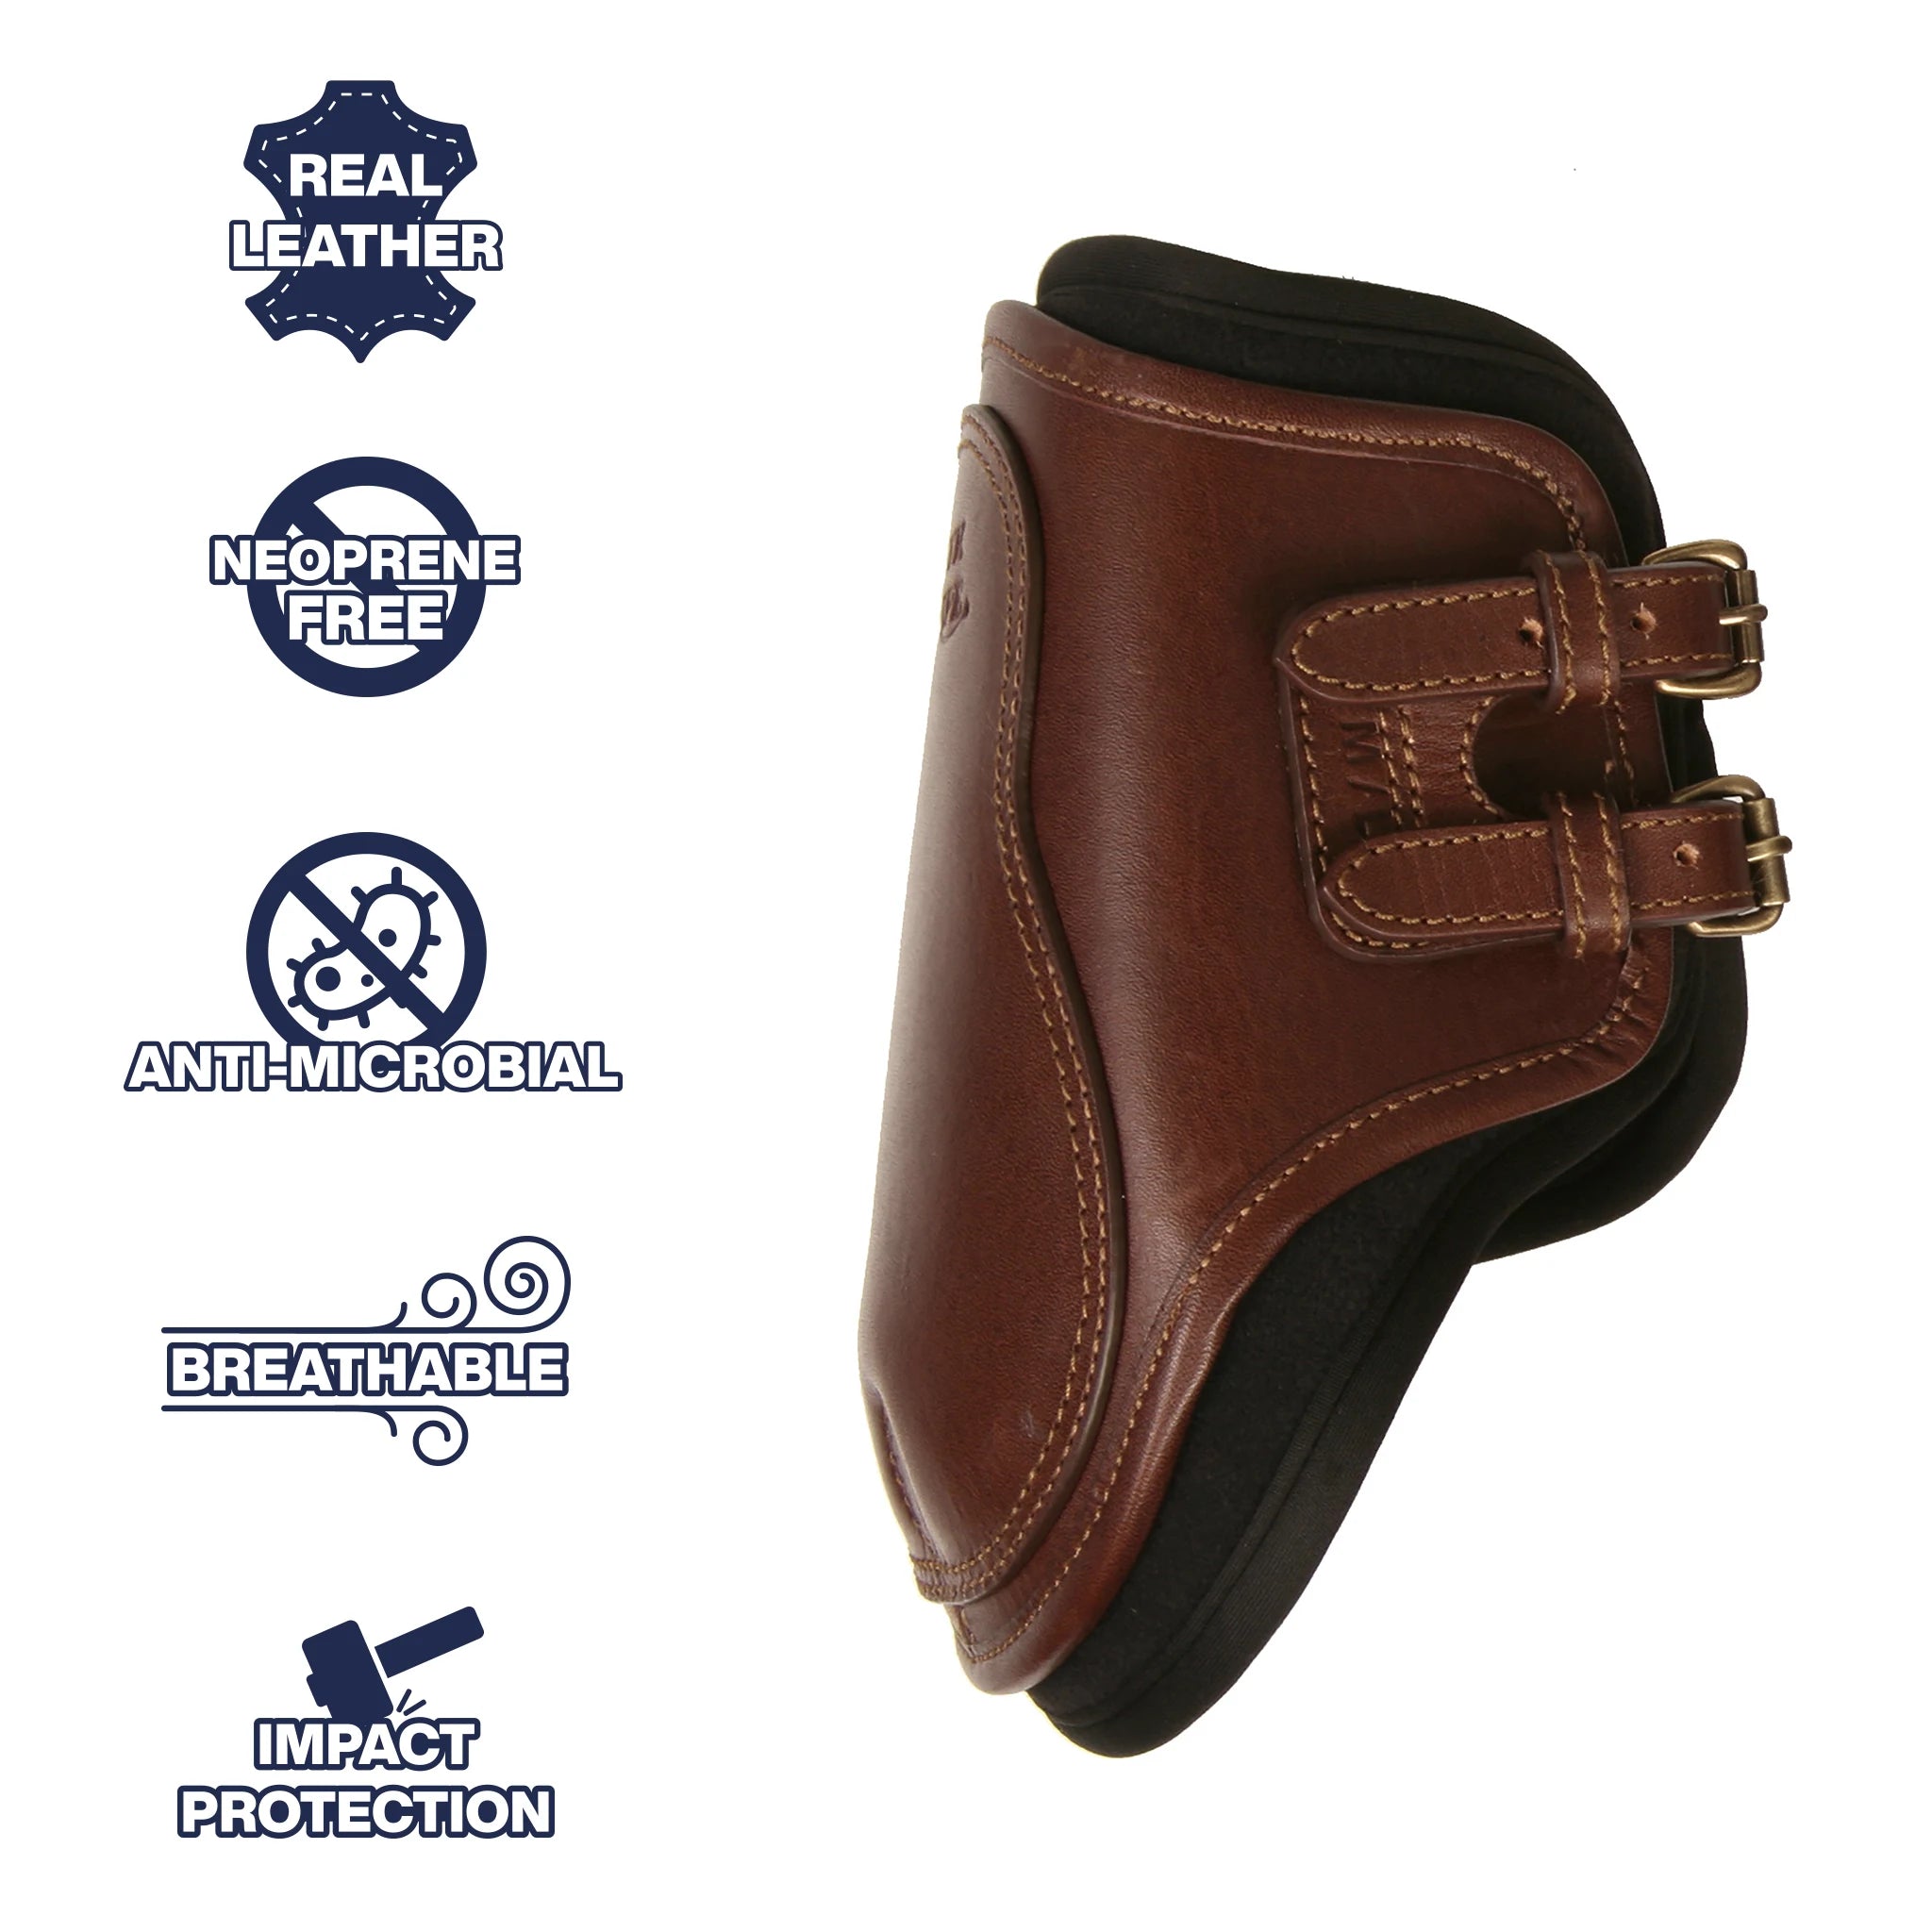 Leather Jumper or Equitation Hind Boot with Impact Protective Removable Liners (Buckle Closures) - Majyk Equipe